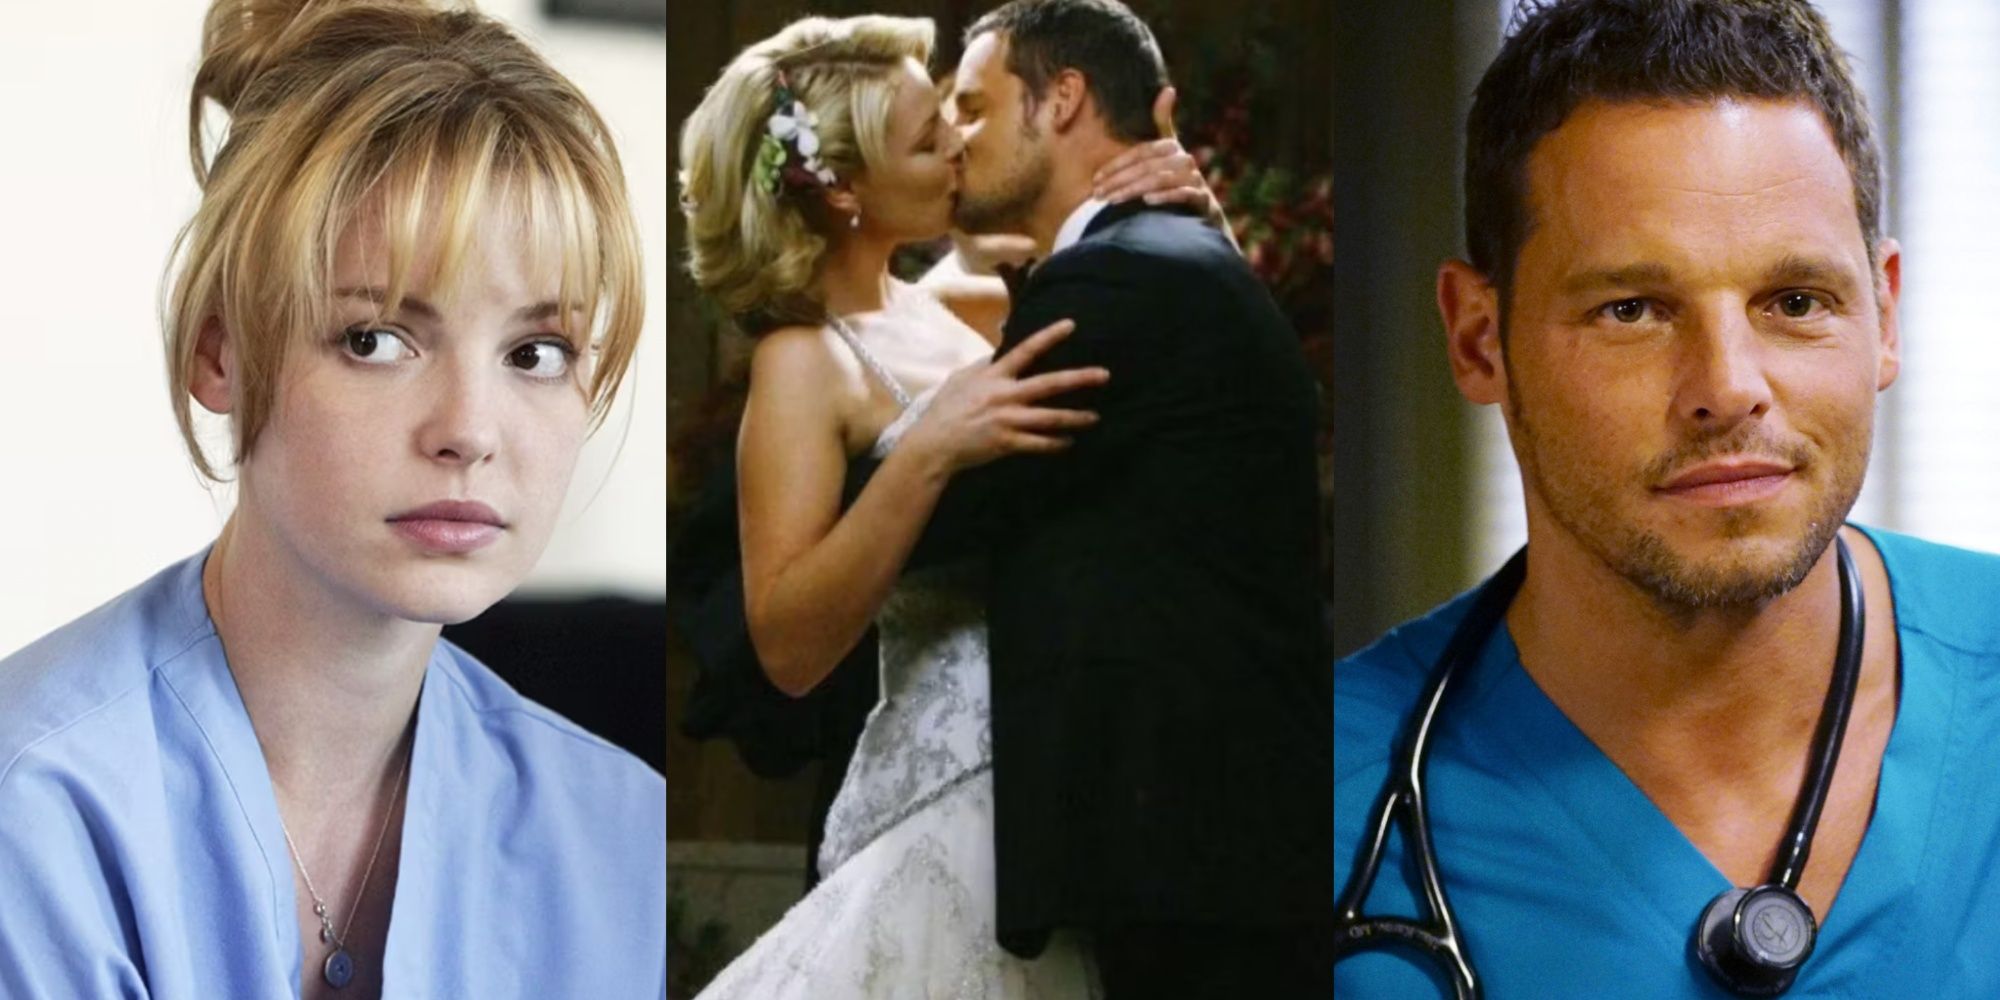 A side by side image features Izzie in scrubs, Izzie and Alex kissing on their wedding day, and Alex in scrubs in Grey's Anatomy